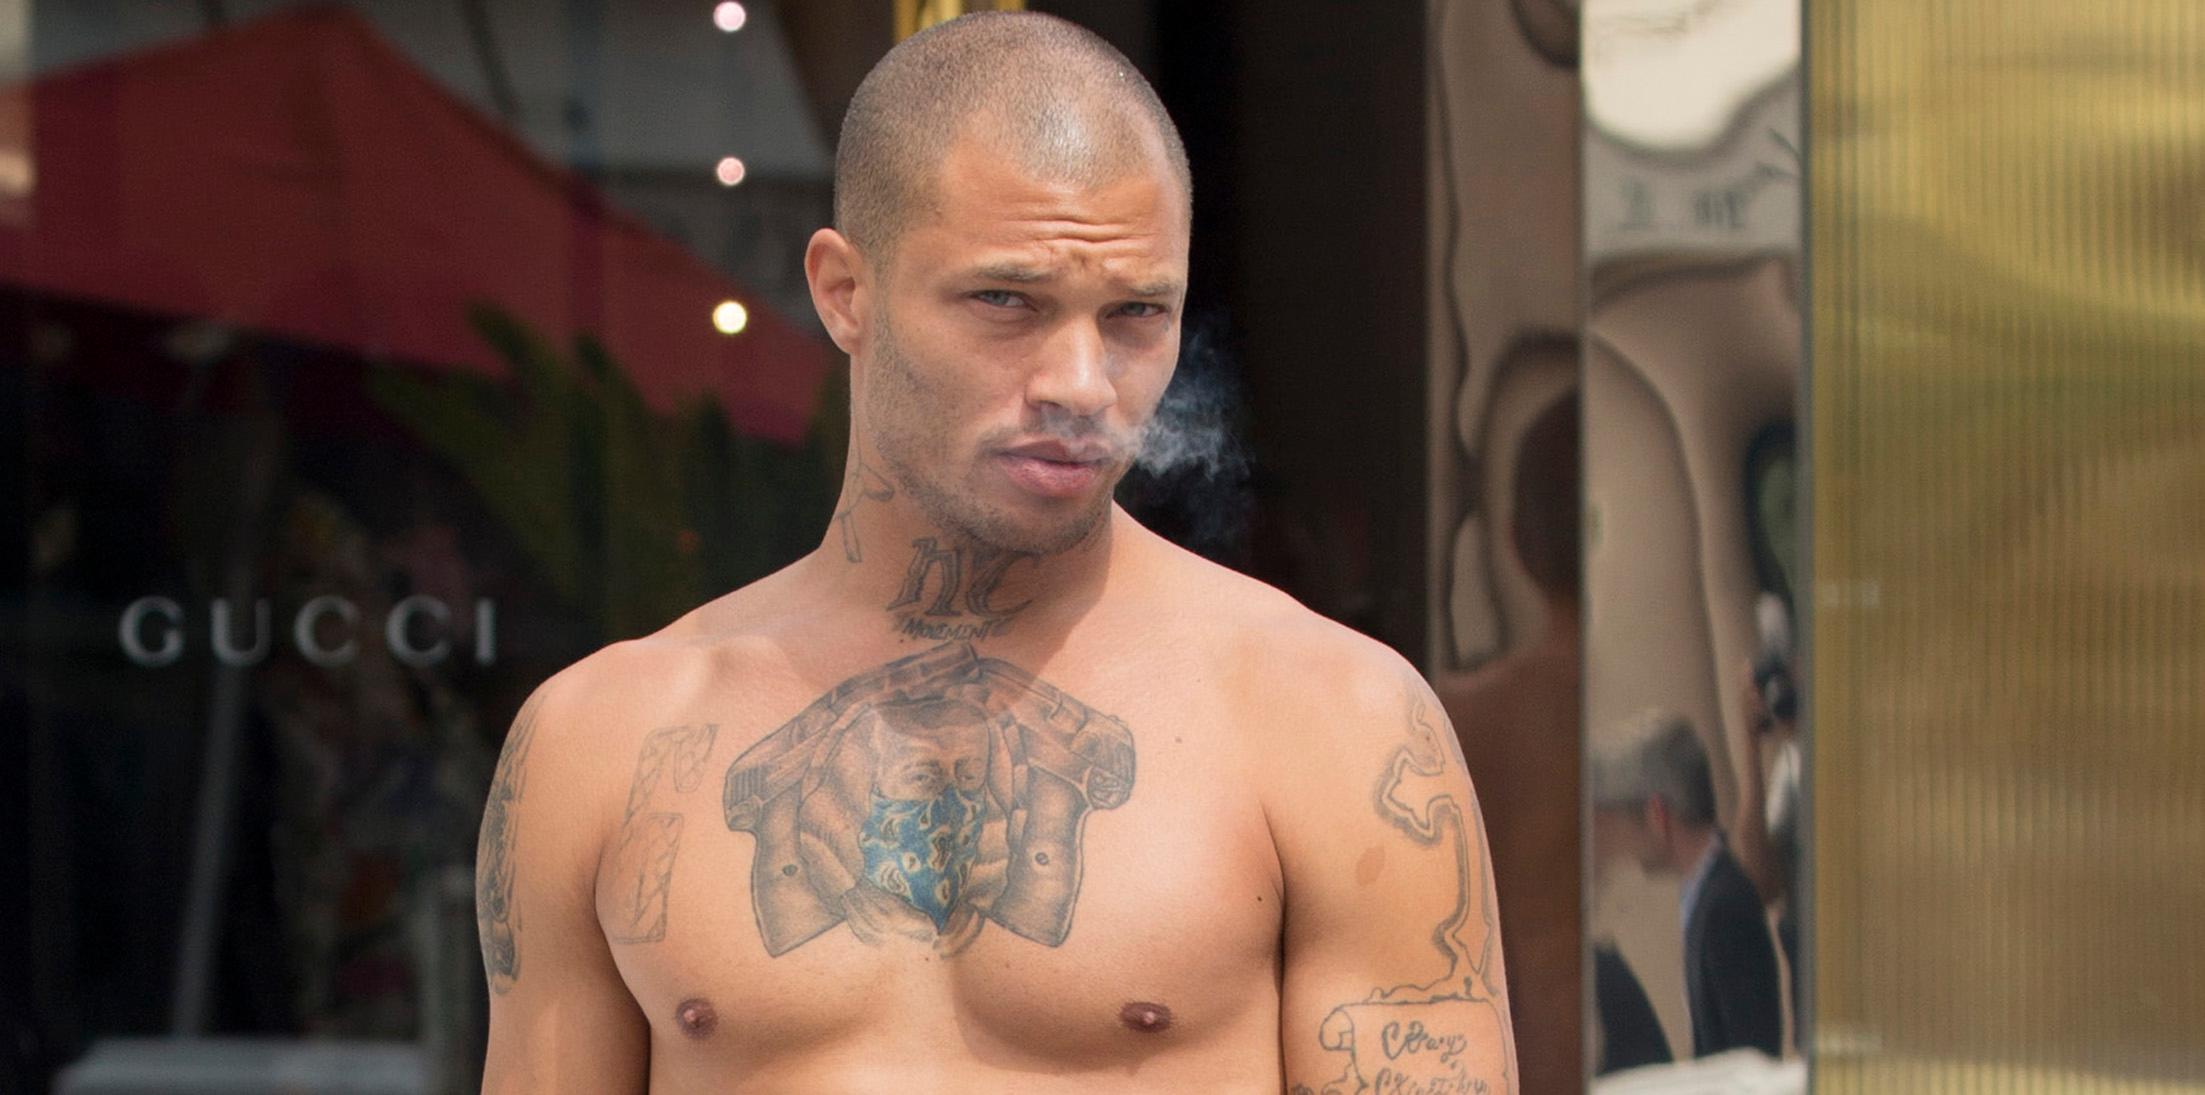 deep narang recommends jeremy meeks naked pic